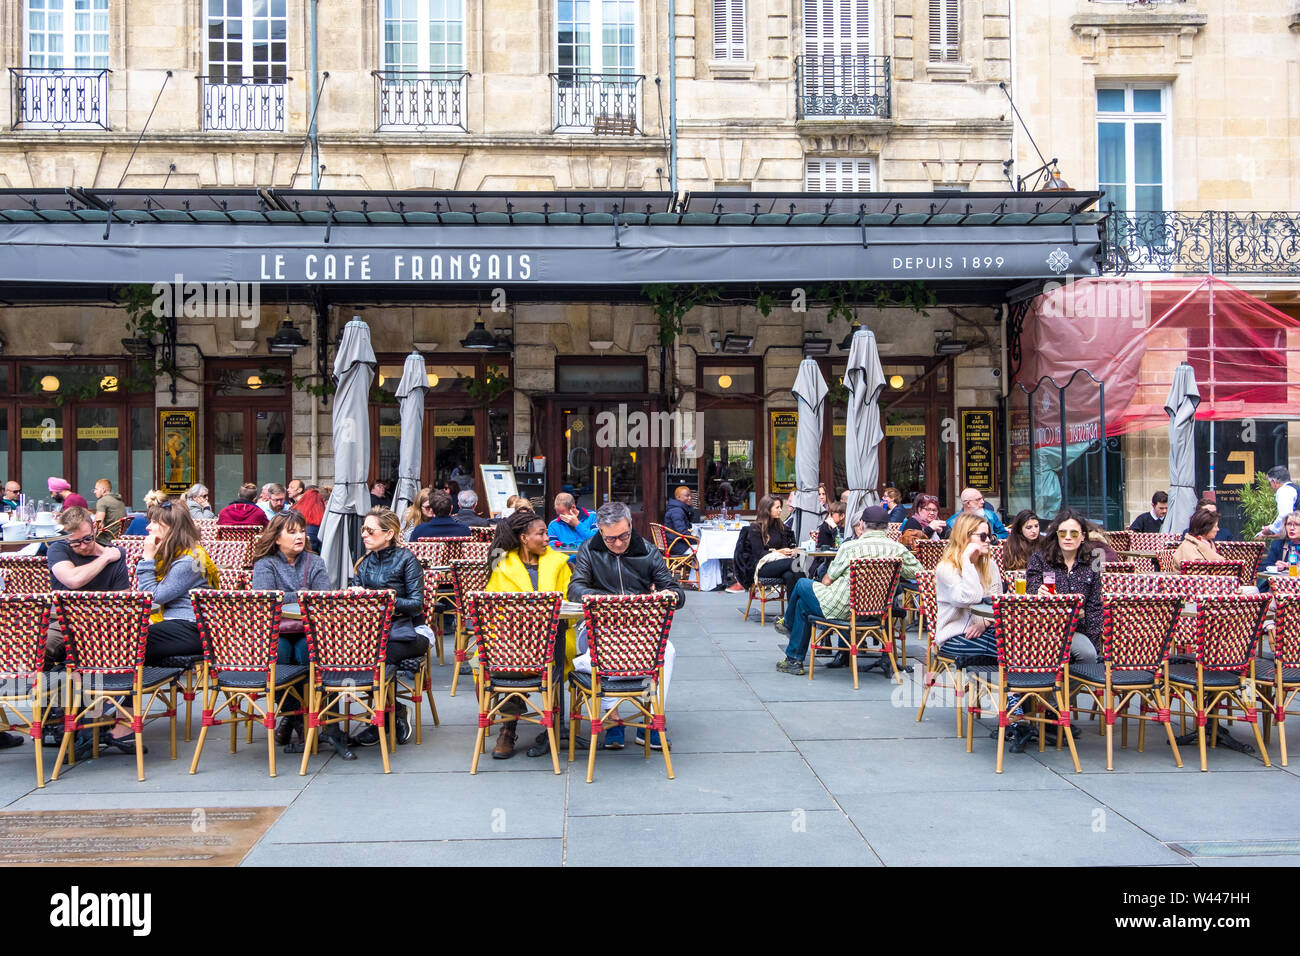 Bordeaux, France - May 5, 2019: A people relax in Cafe Francais on Place Pey Berland in Bordeaux, Aquitaine, France Stock Photo